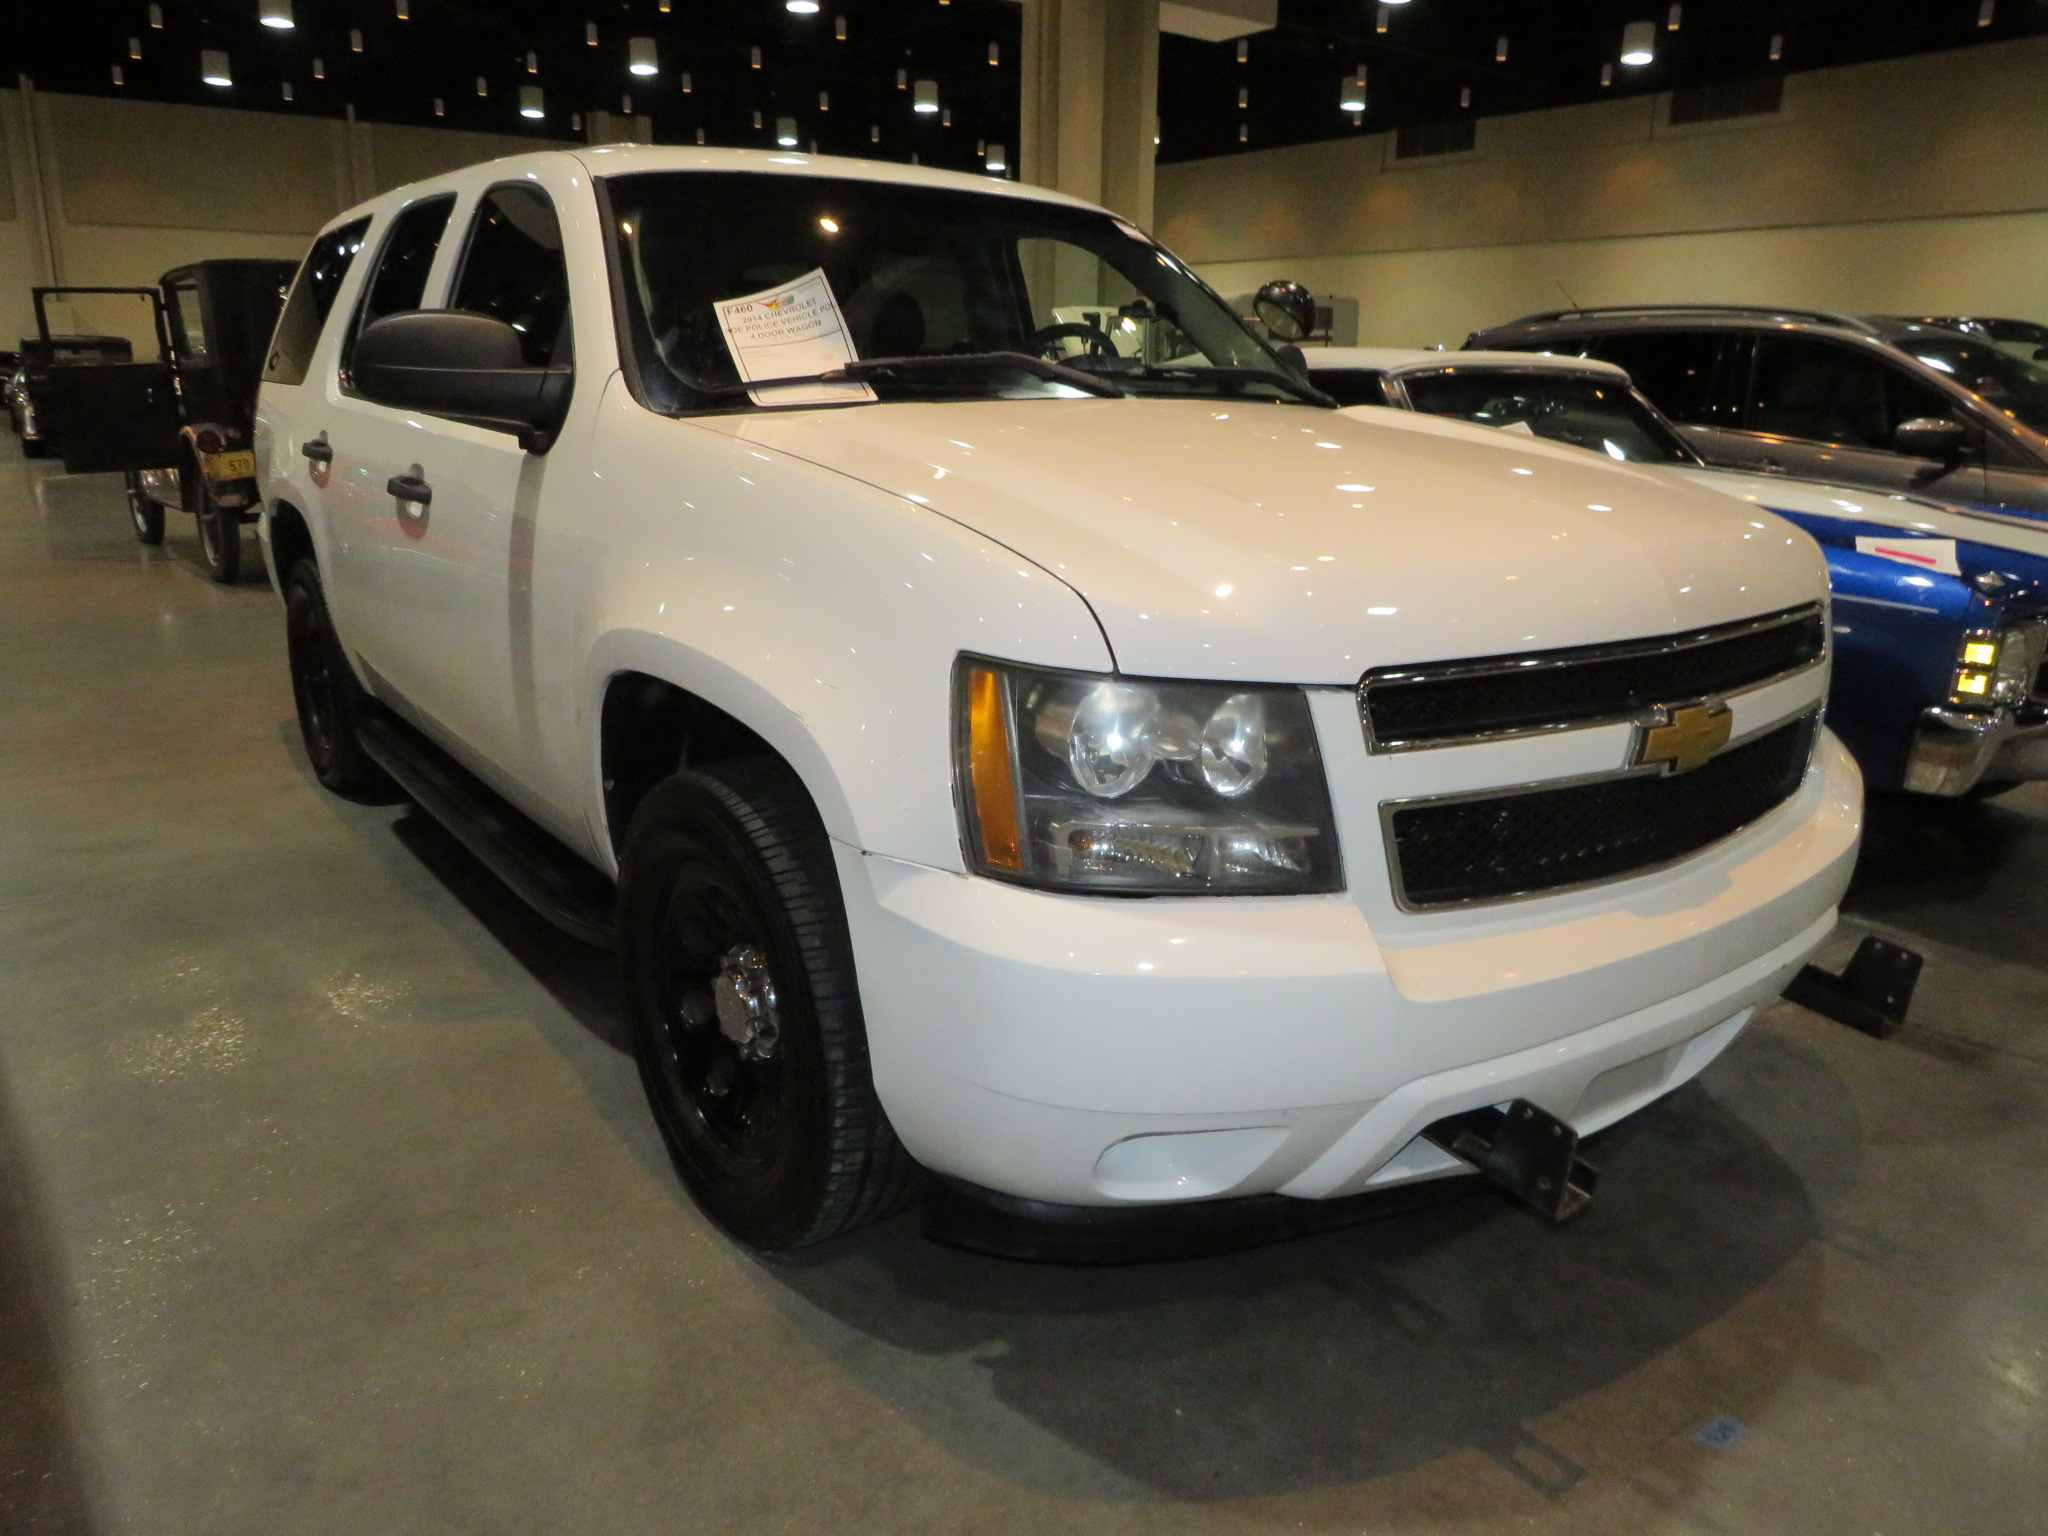 0th Image of a 2014 CHEVROLET TAHOE POLICE VEHICLE POLICE